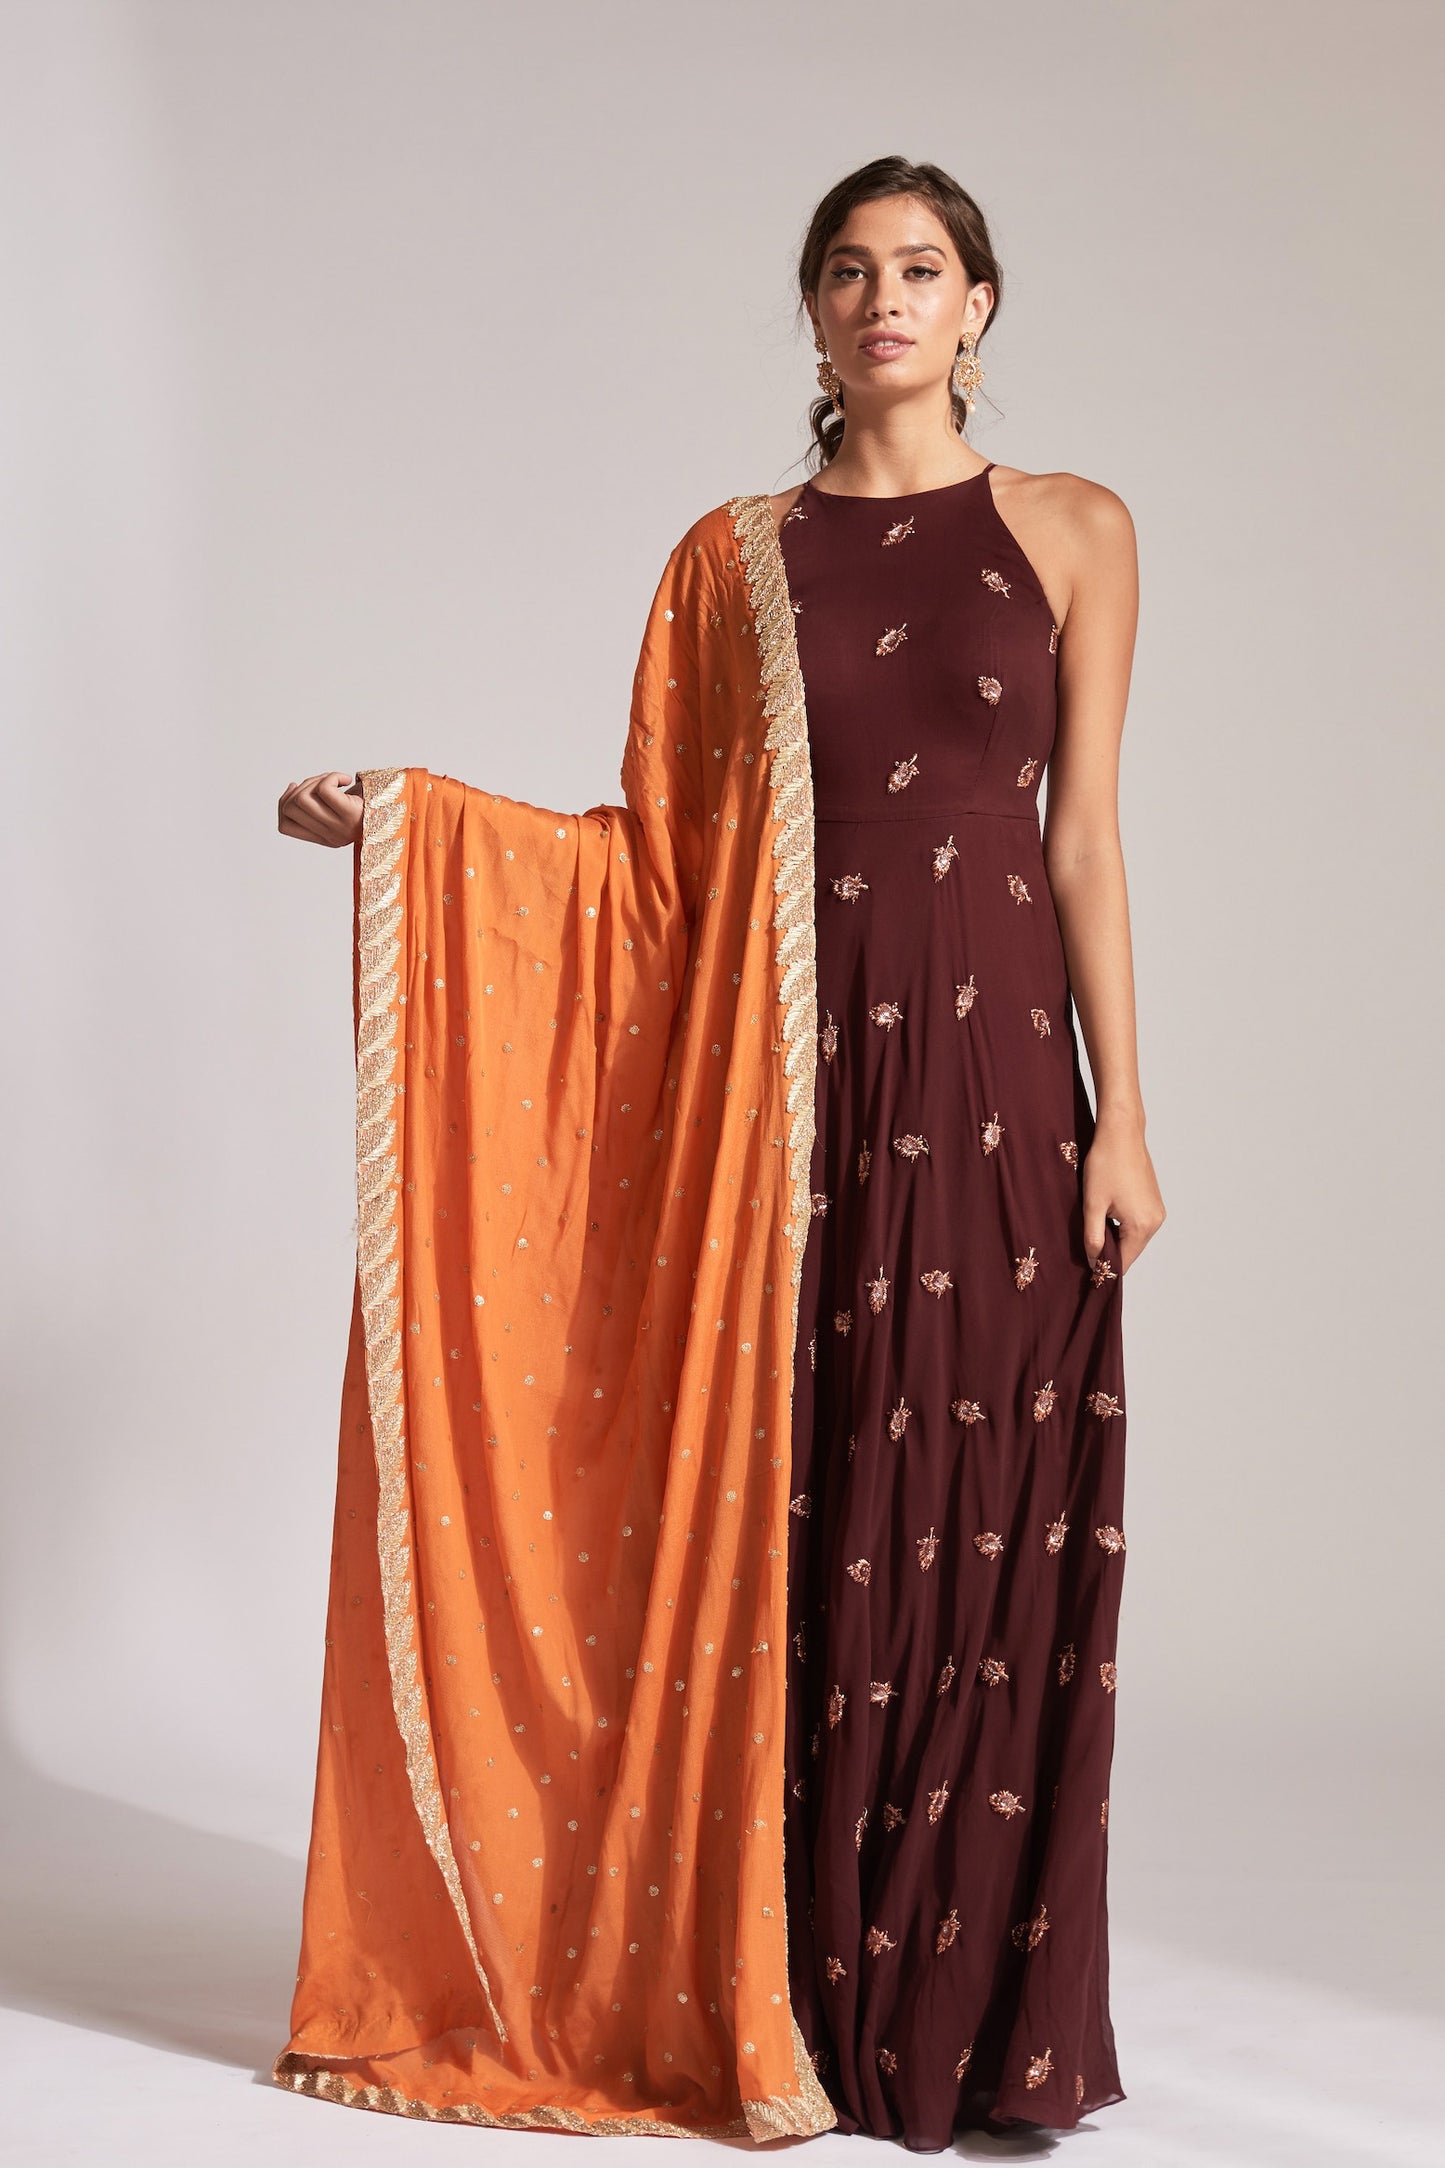 The Nila Anarkali has a halter neck-cut bodice, flowing waistline, and is paired with a contrasting silk crepe dupatta.